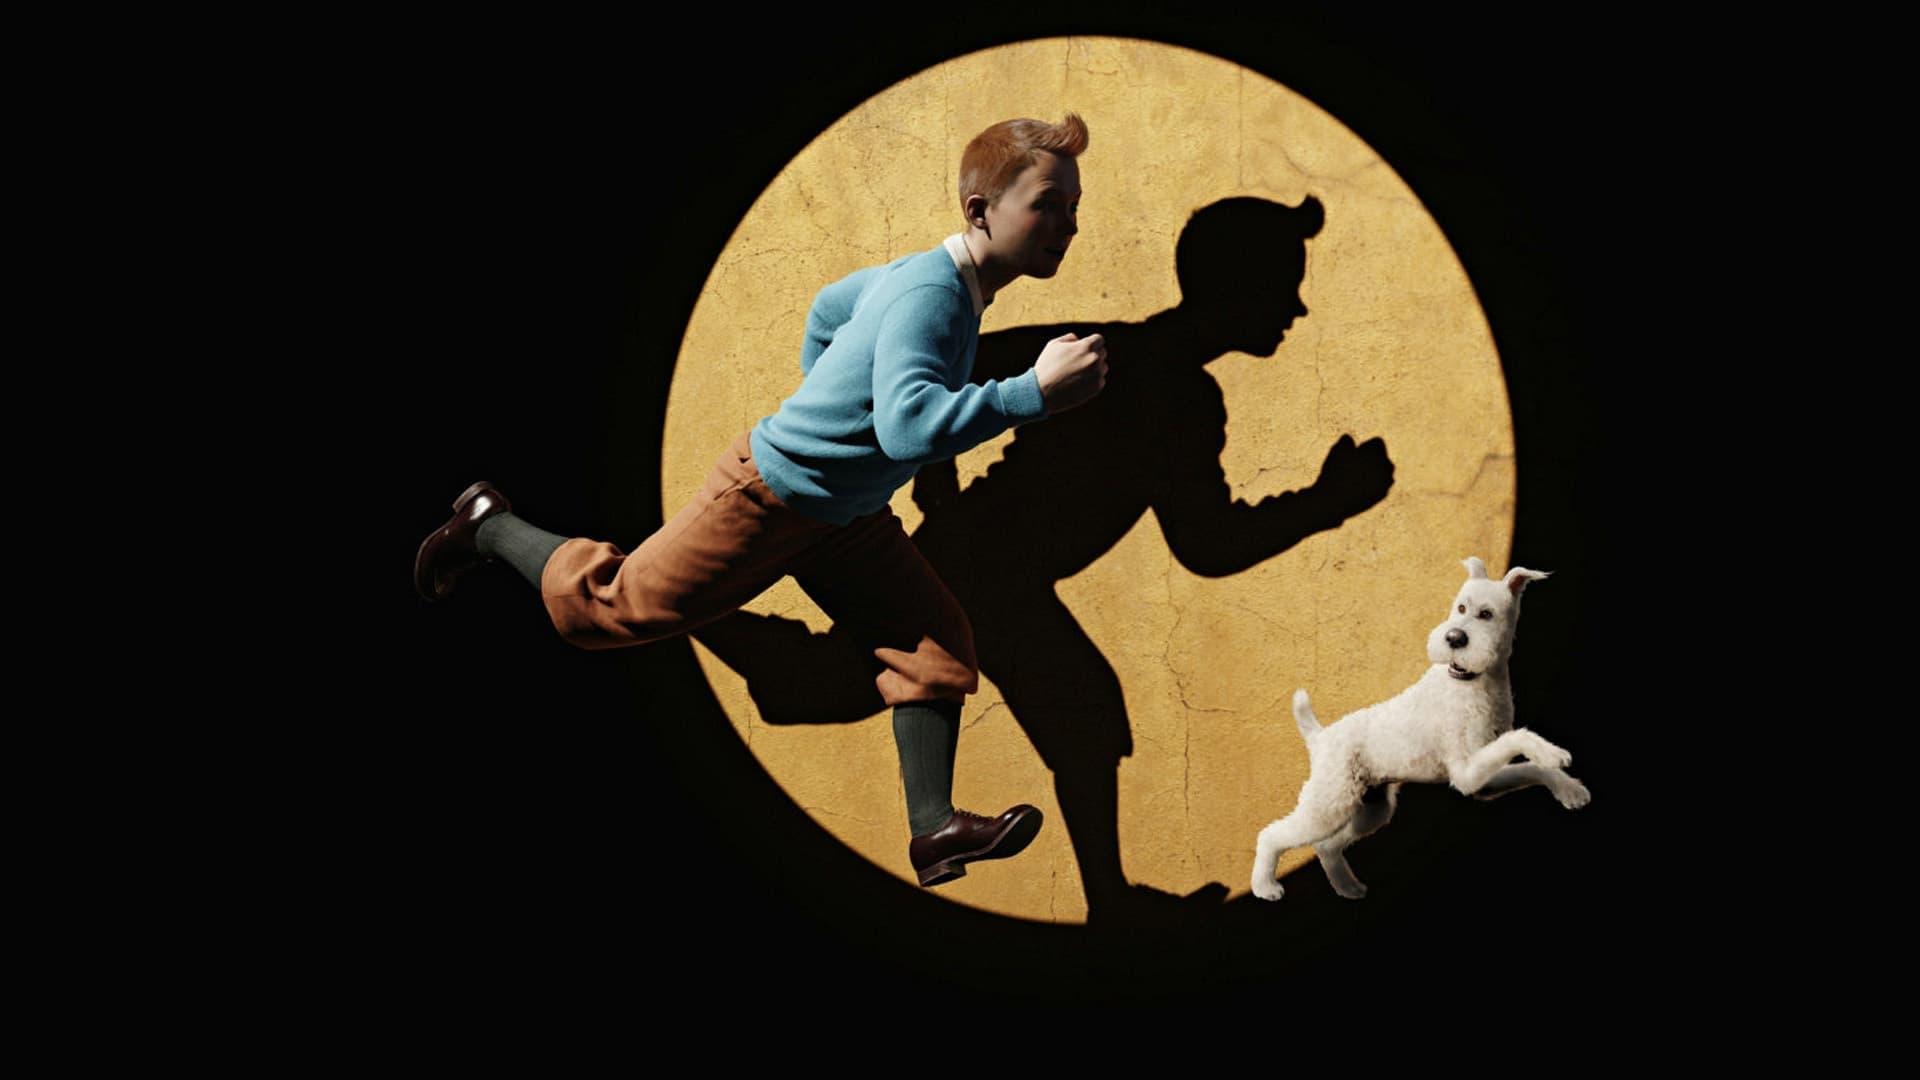 The Adventures of Tintin backdrop